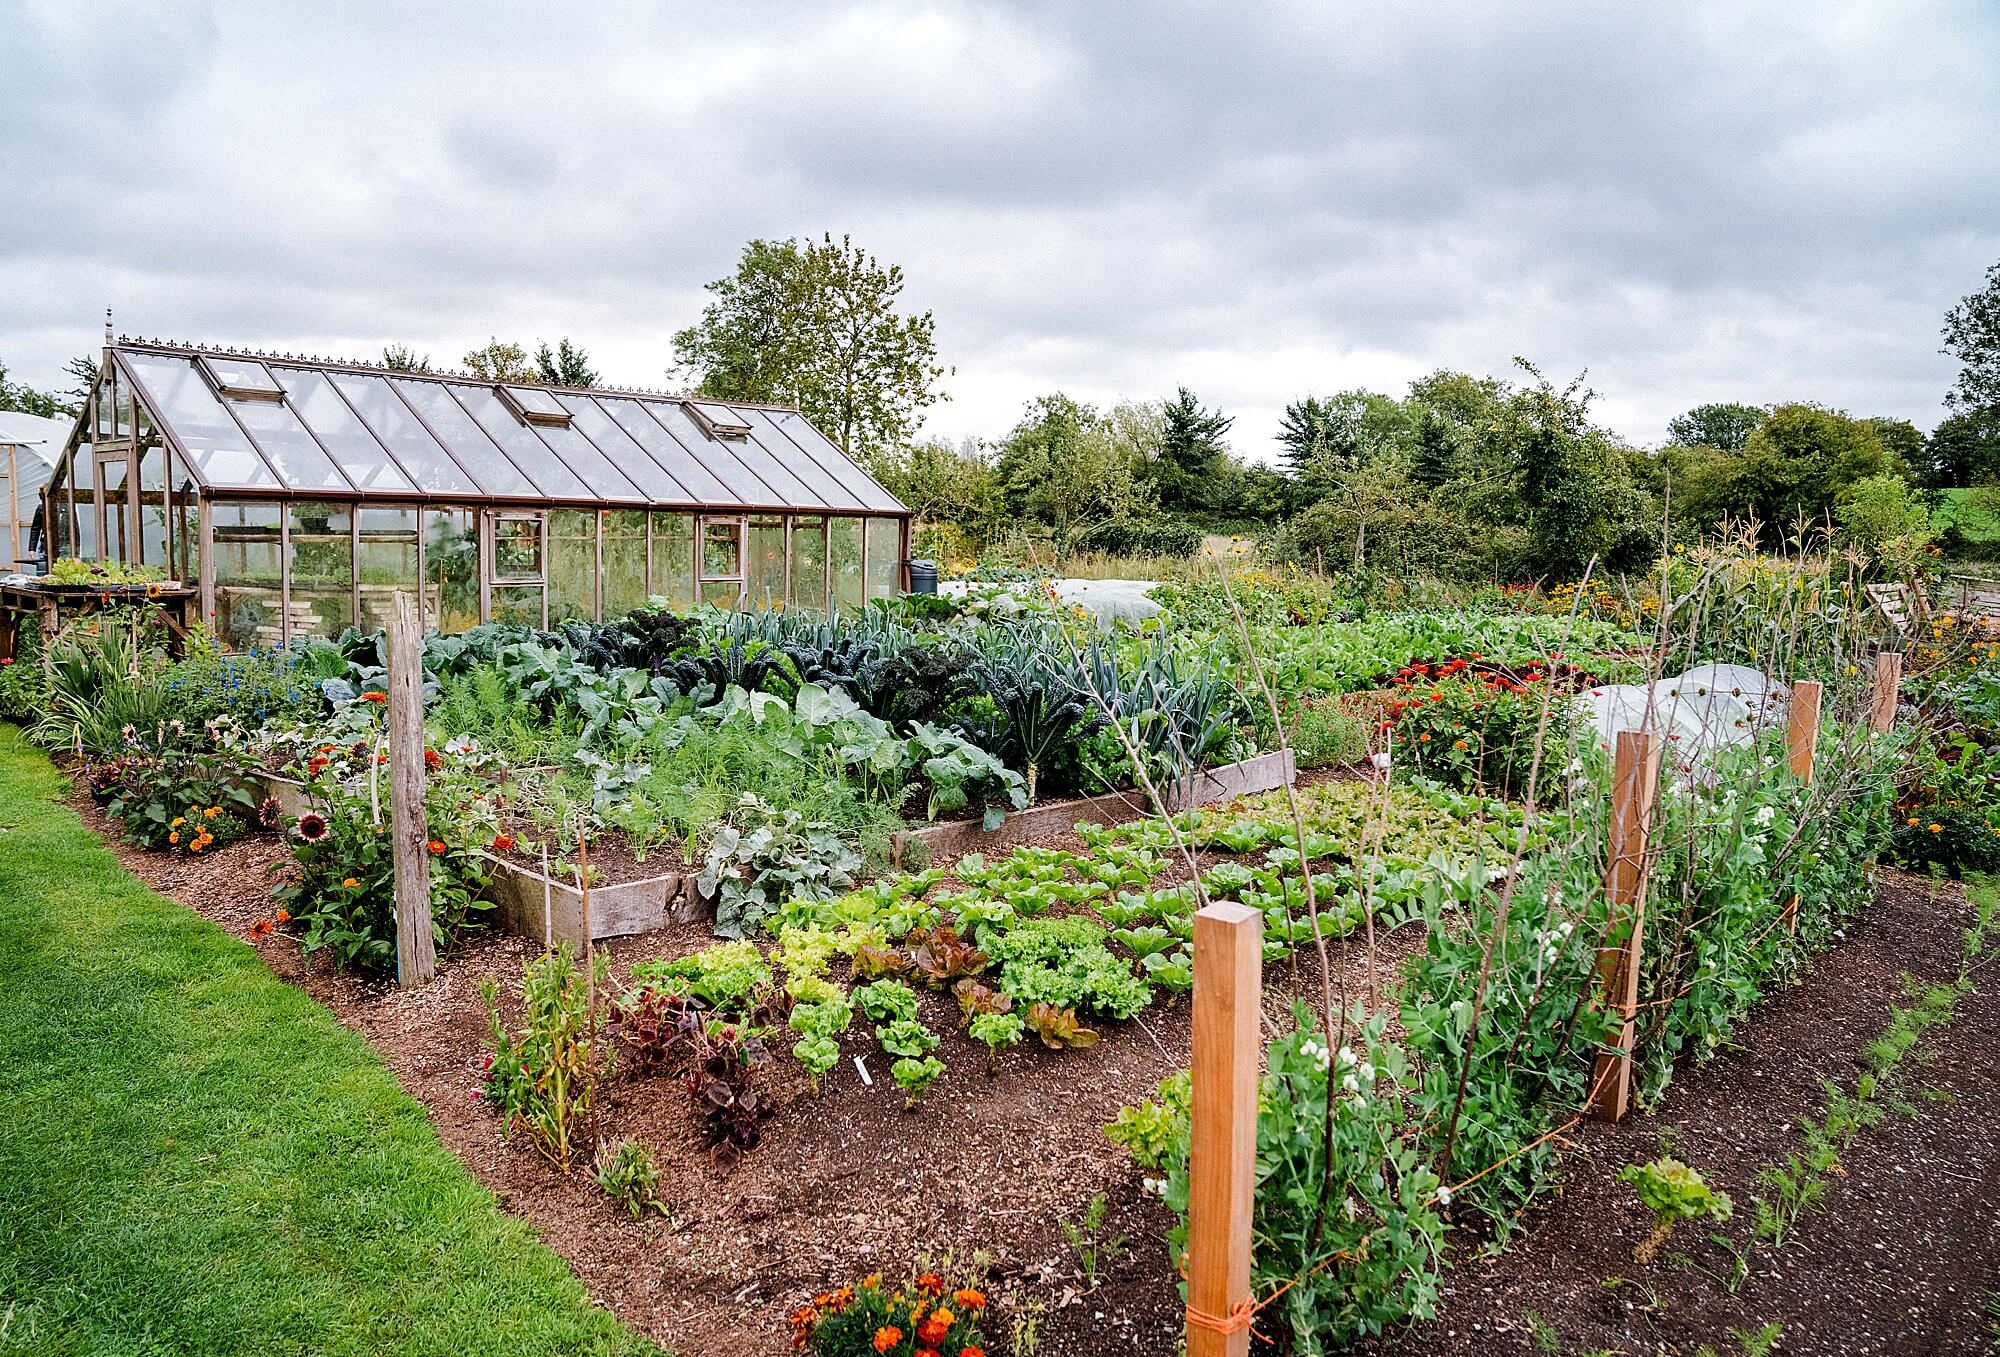 homeacres is the no dig garden plot of charles dowding, author of several gardening books